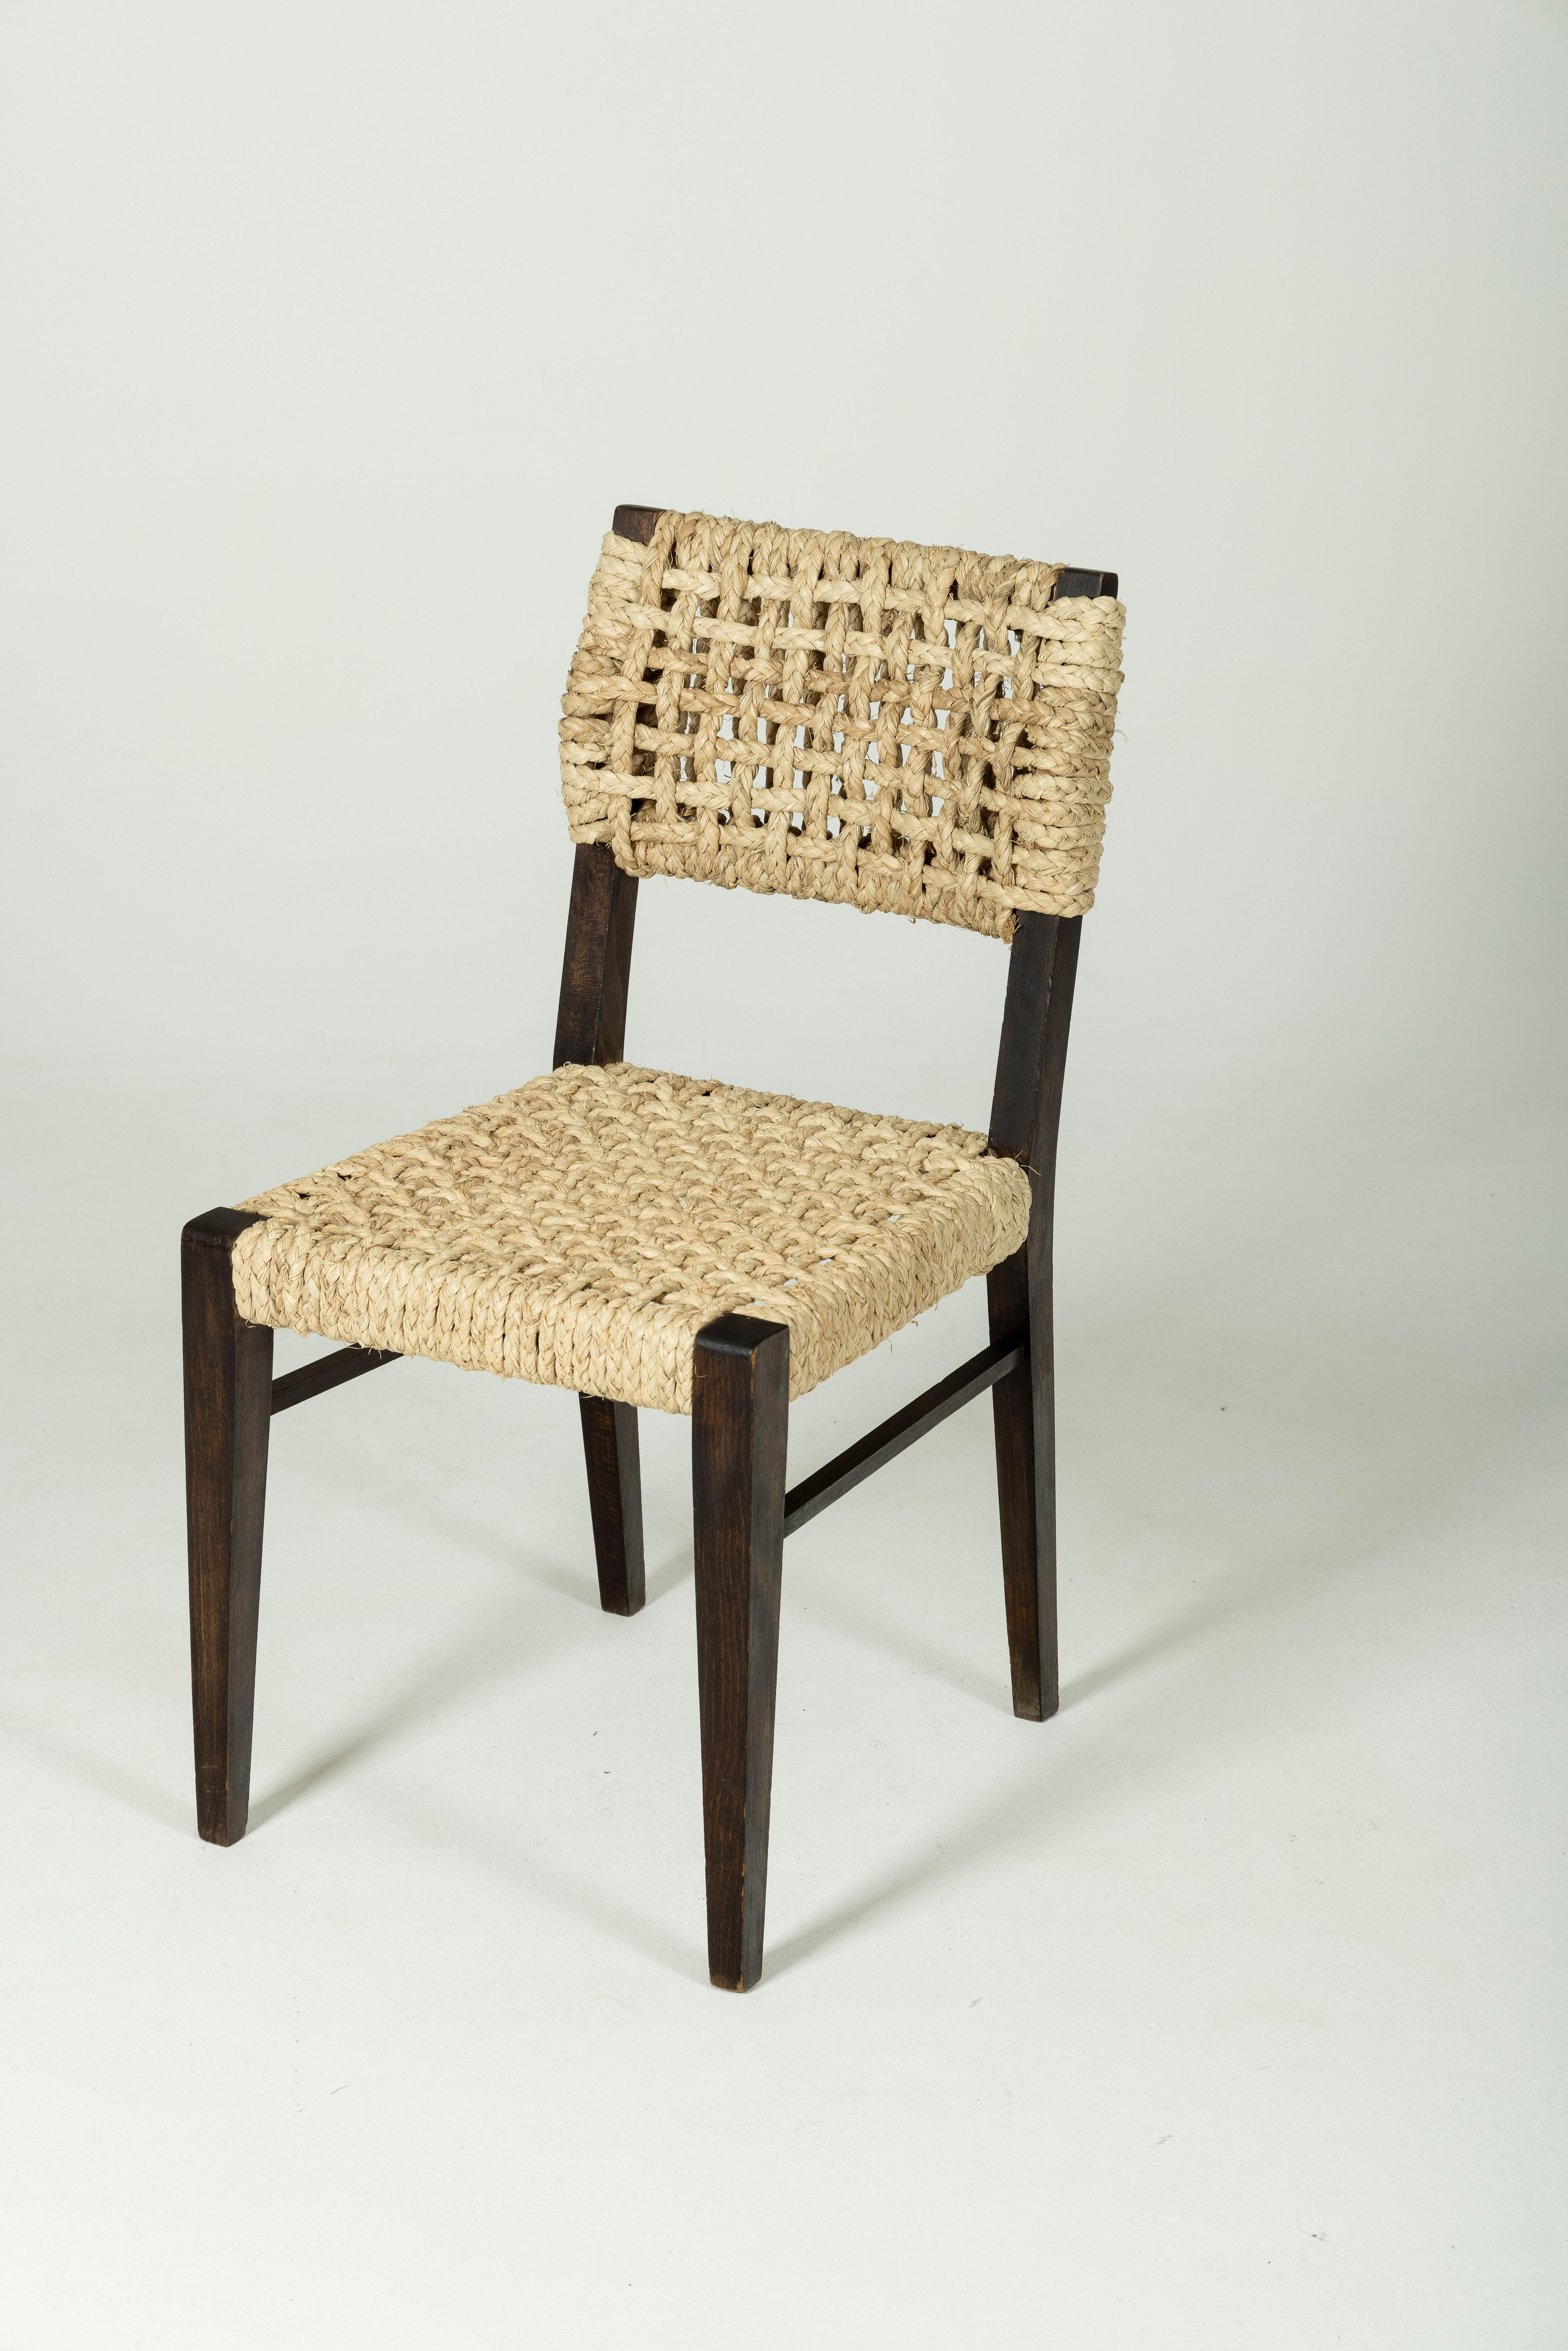 Rope chair by the designer couple Adrien Audoux and Frida Minet for Vibo Vesoul, from the 1950s. The seat and backrest are made of hemp, and the frame is in dark wood. In very good vintage condition.
LP372